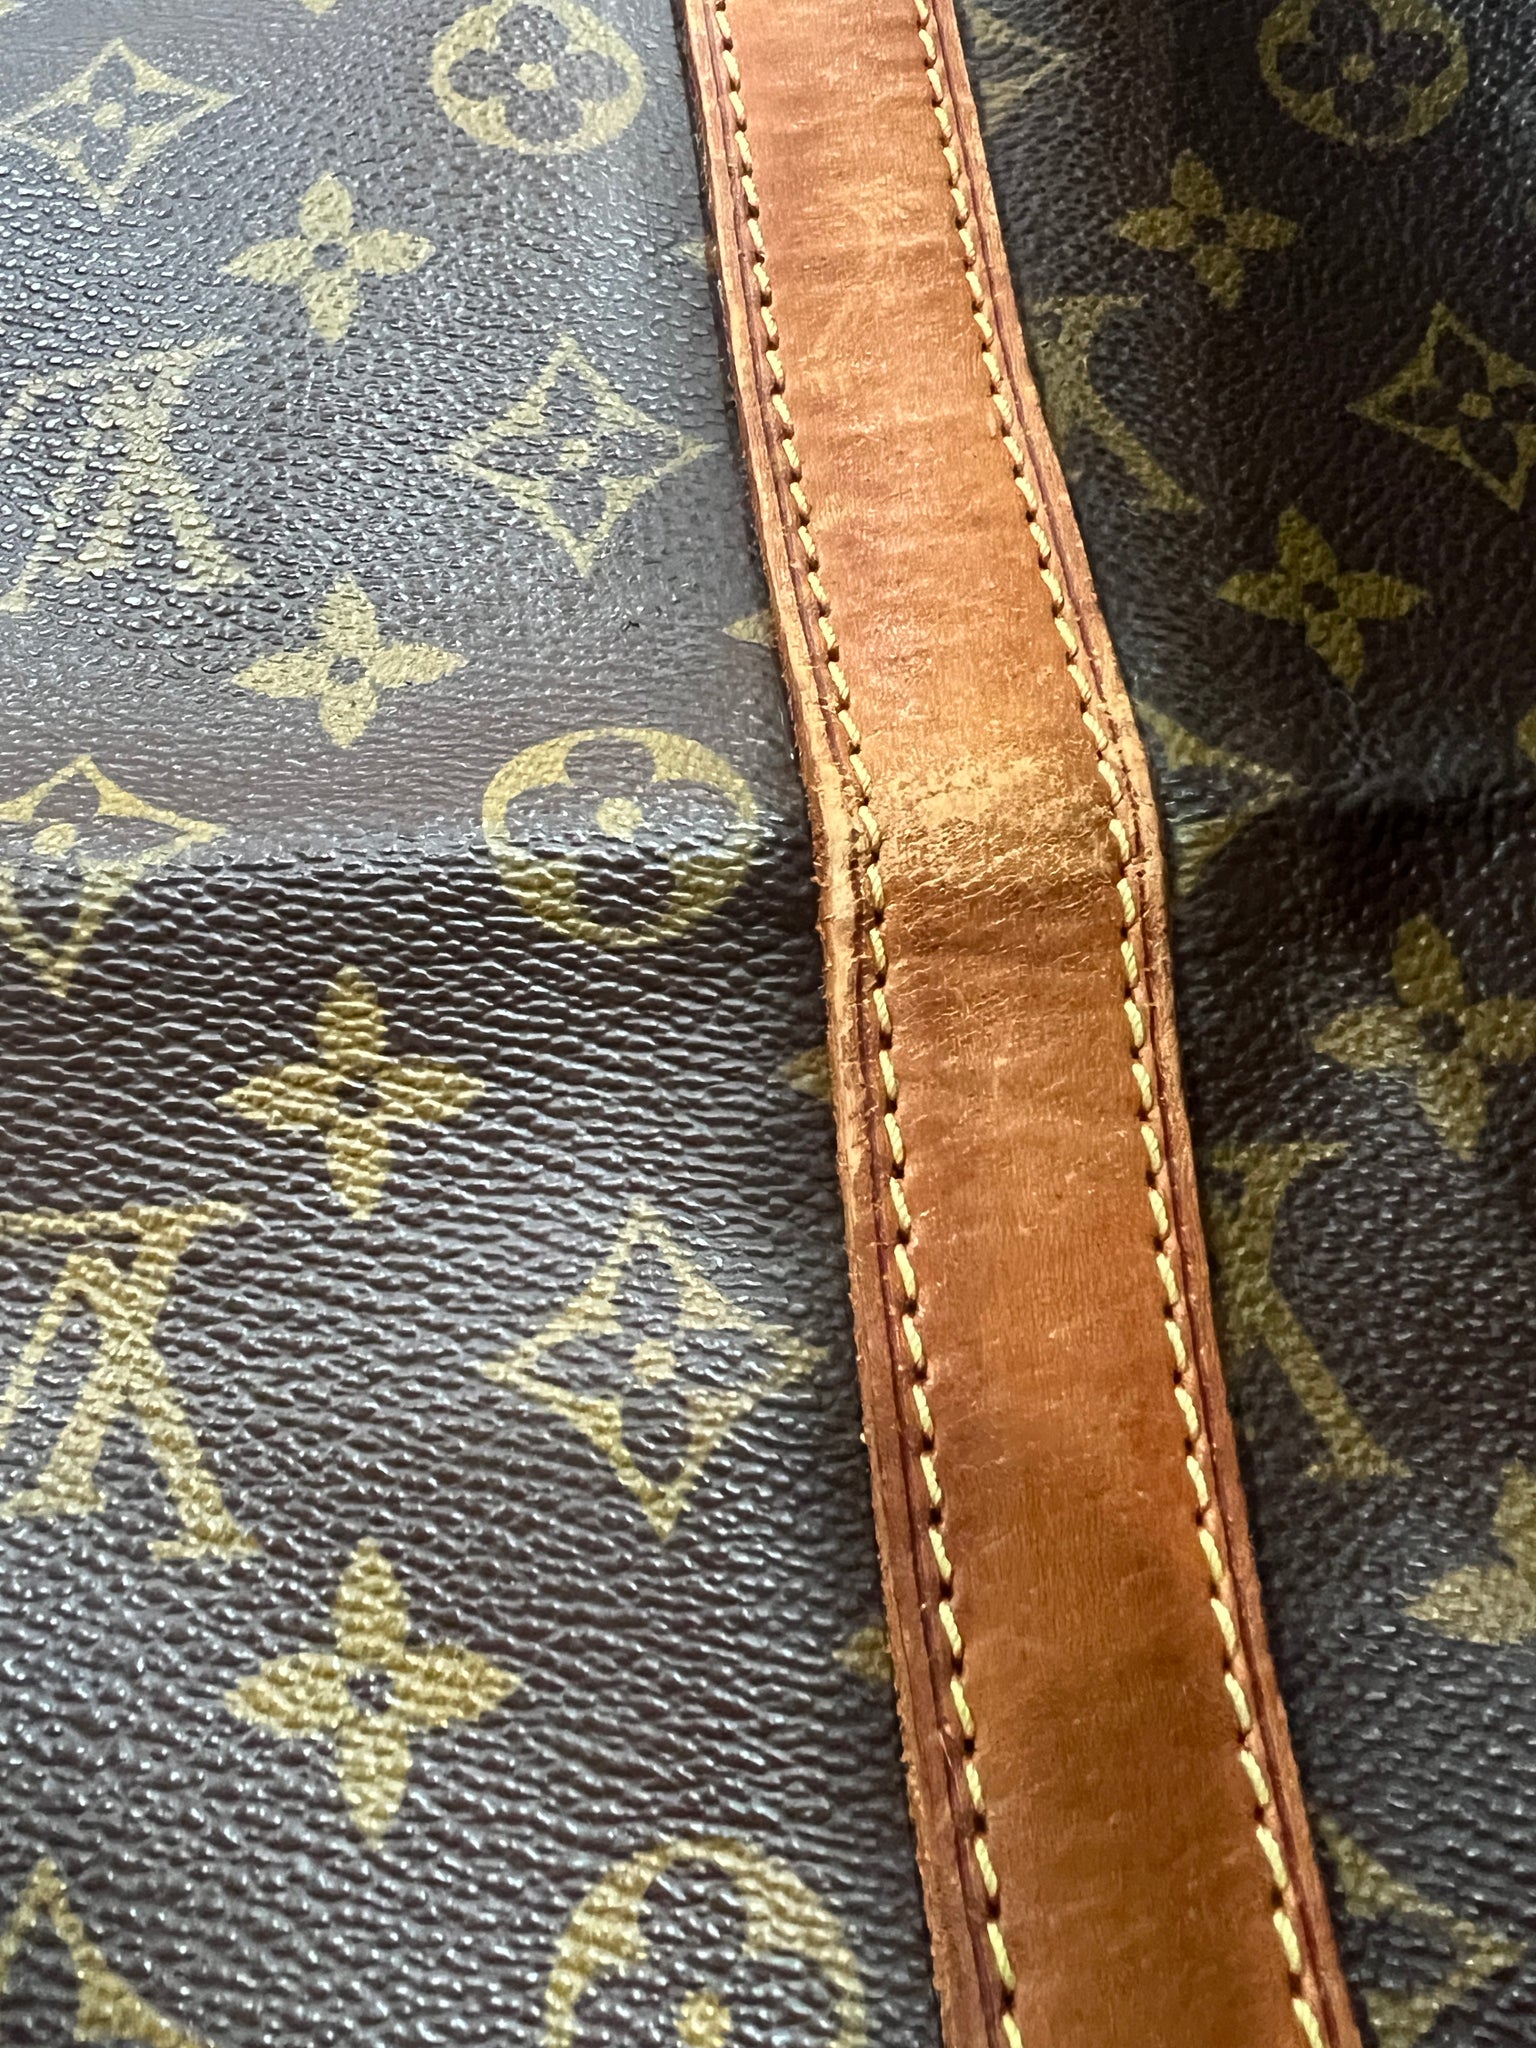 Travel bag Louis Vuitton Keepall 55 customized Fight Club by the